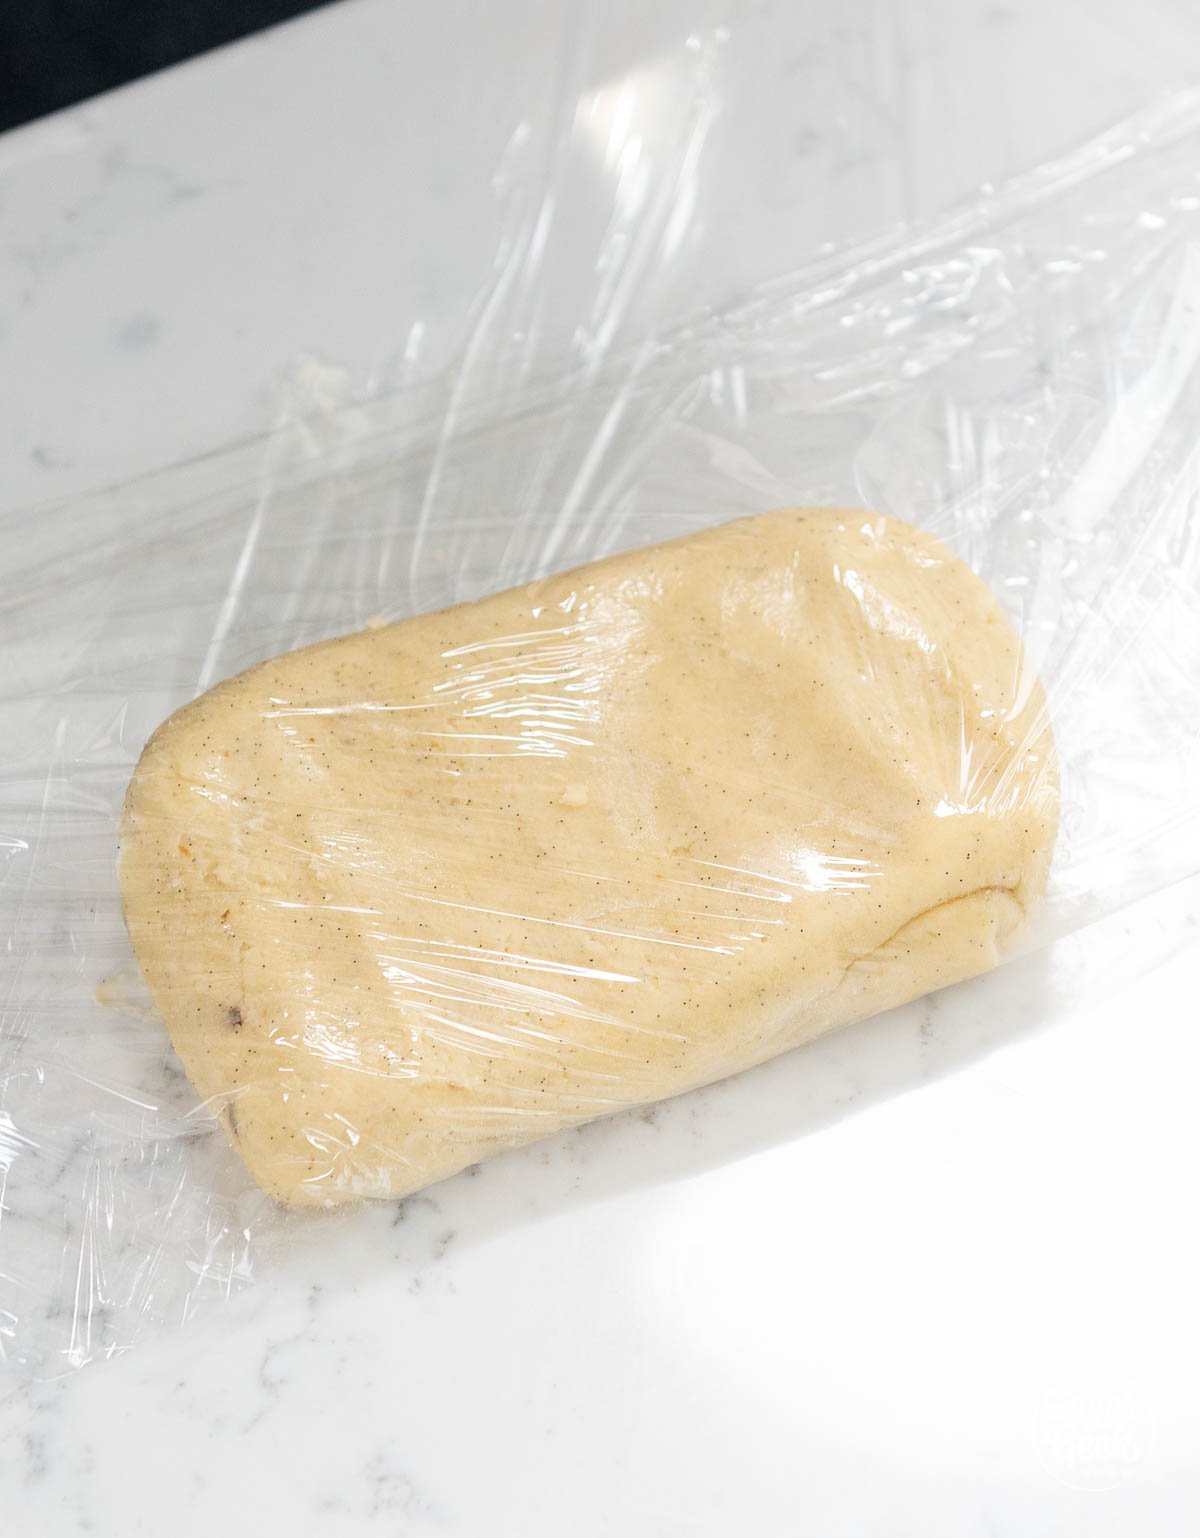 dough in a rectangle shape covered in plastic wrap